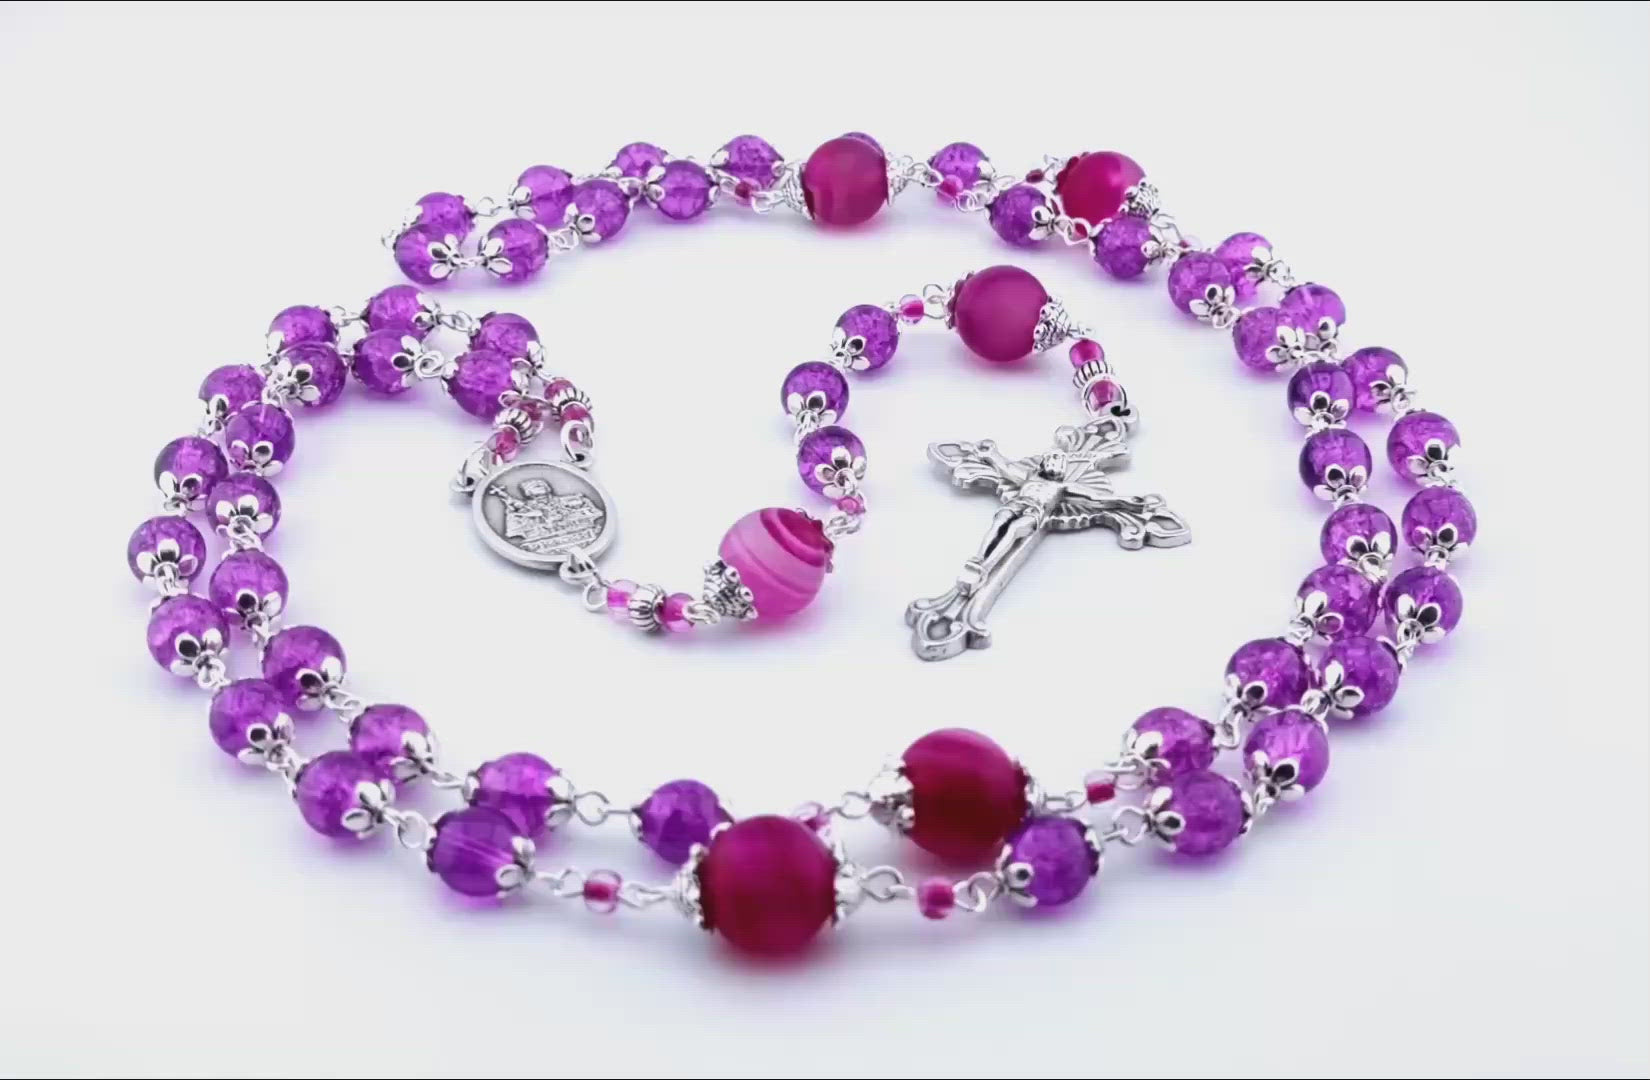 Saint Agatha unique rosary beads with pink glass and gemstone beads, silver crucifix and centre medal.